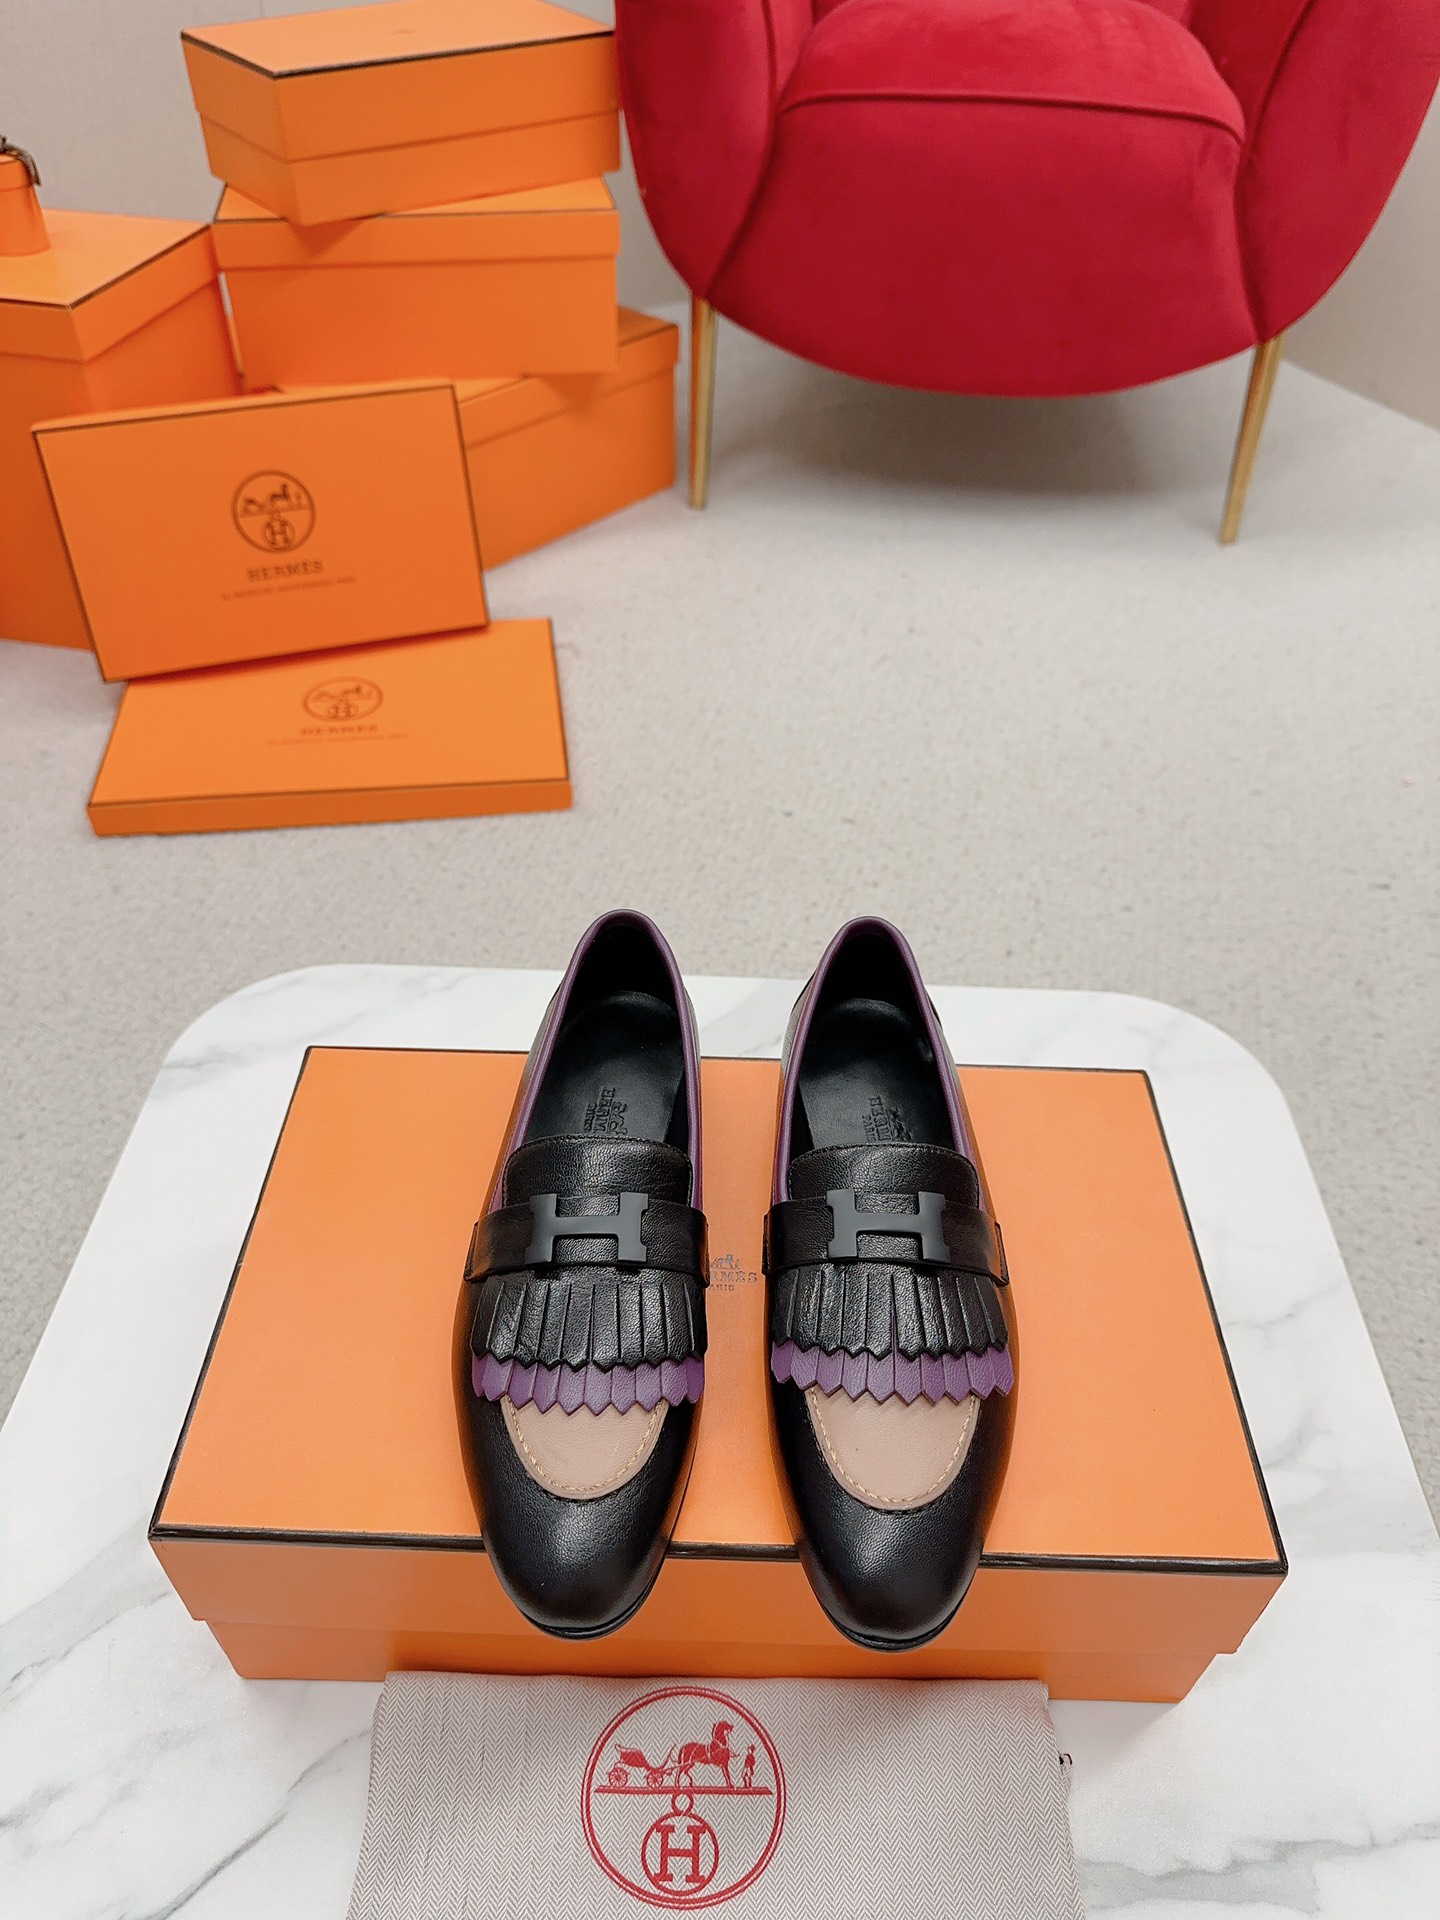 Hermes Shoes Loafers Buy High-Quality Fake
 Splicing